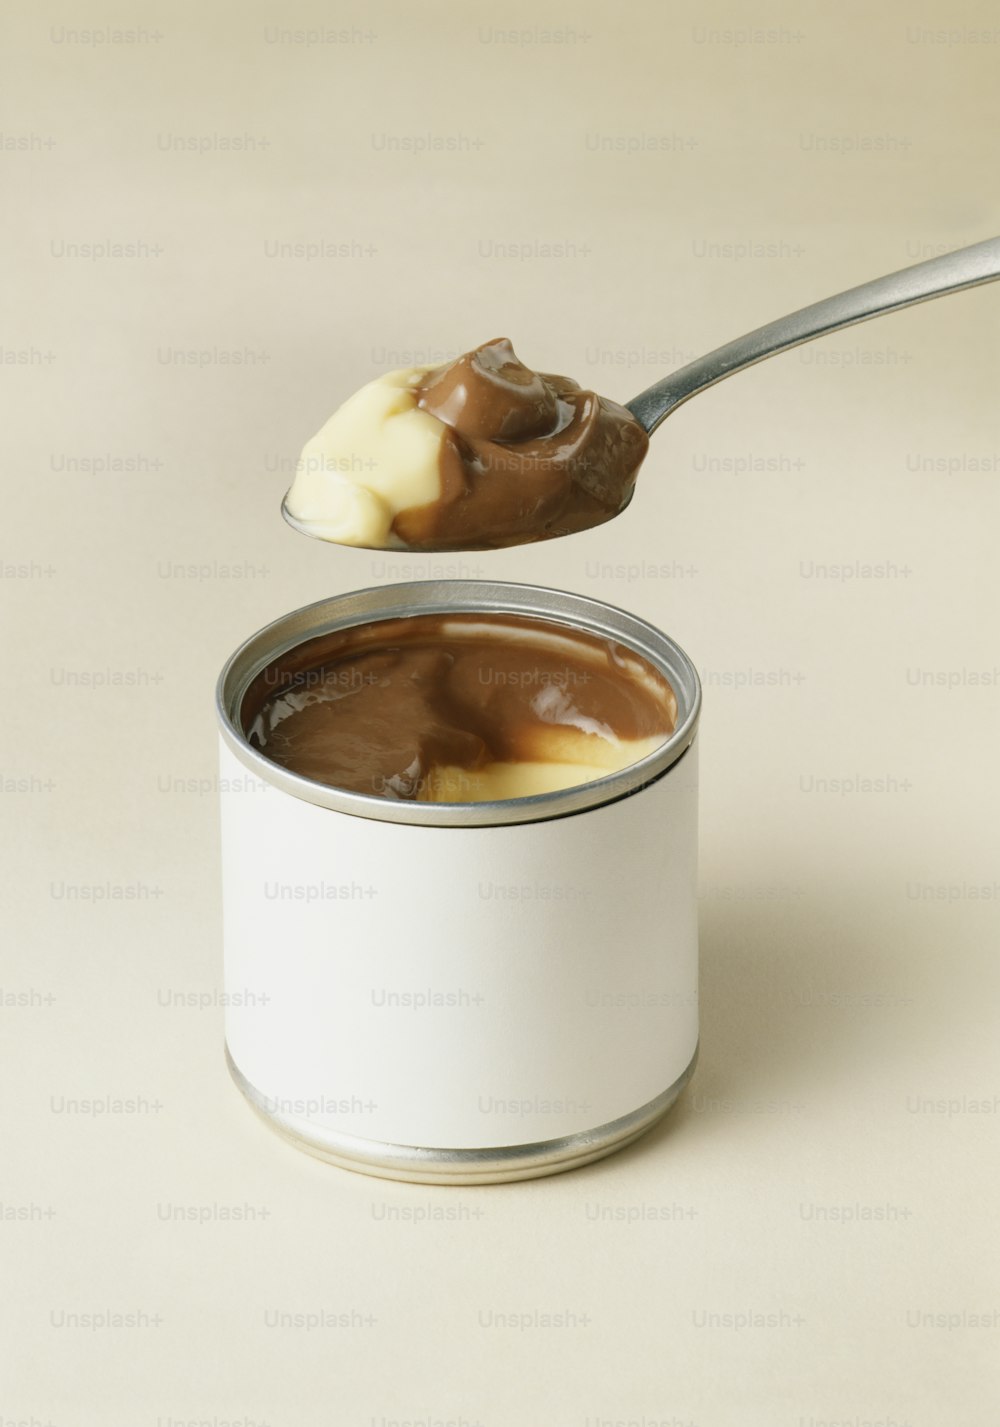 a spoon full of chocolate pudding with a bite taken out of it